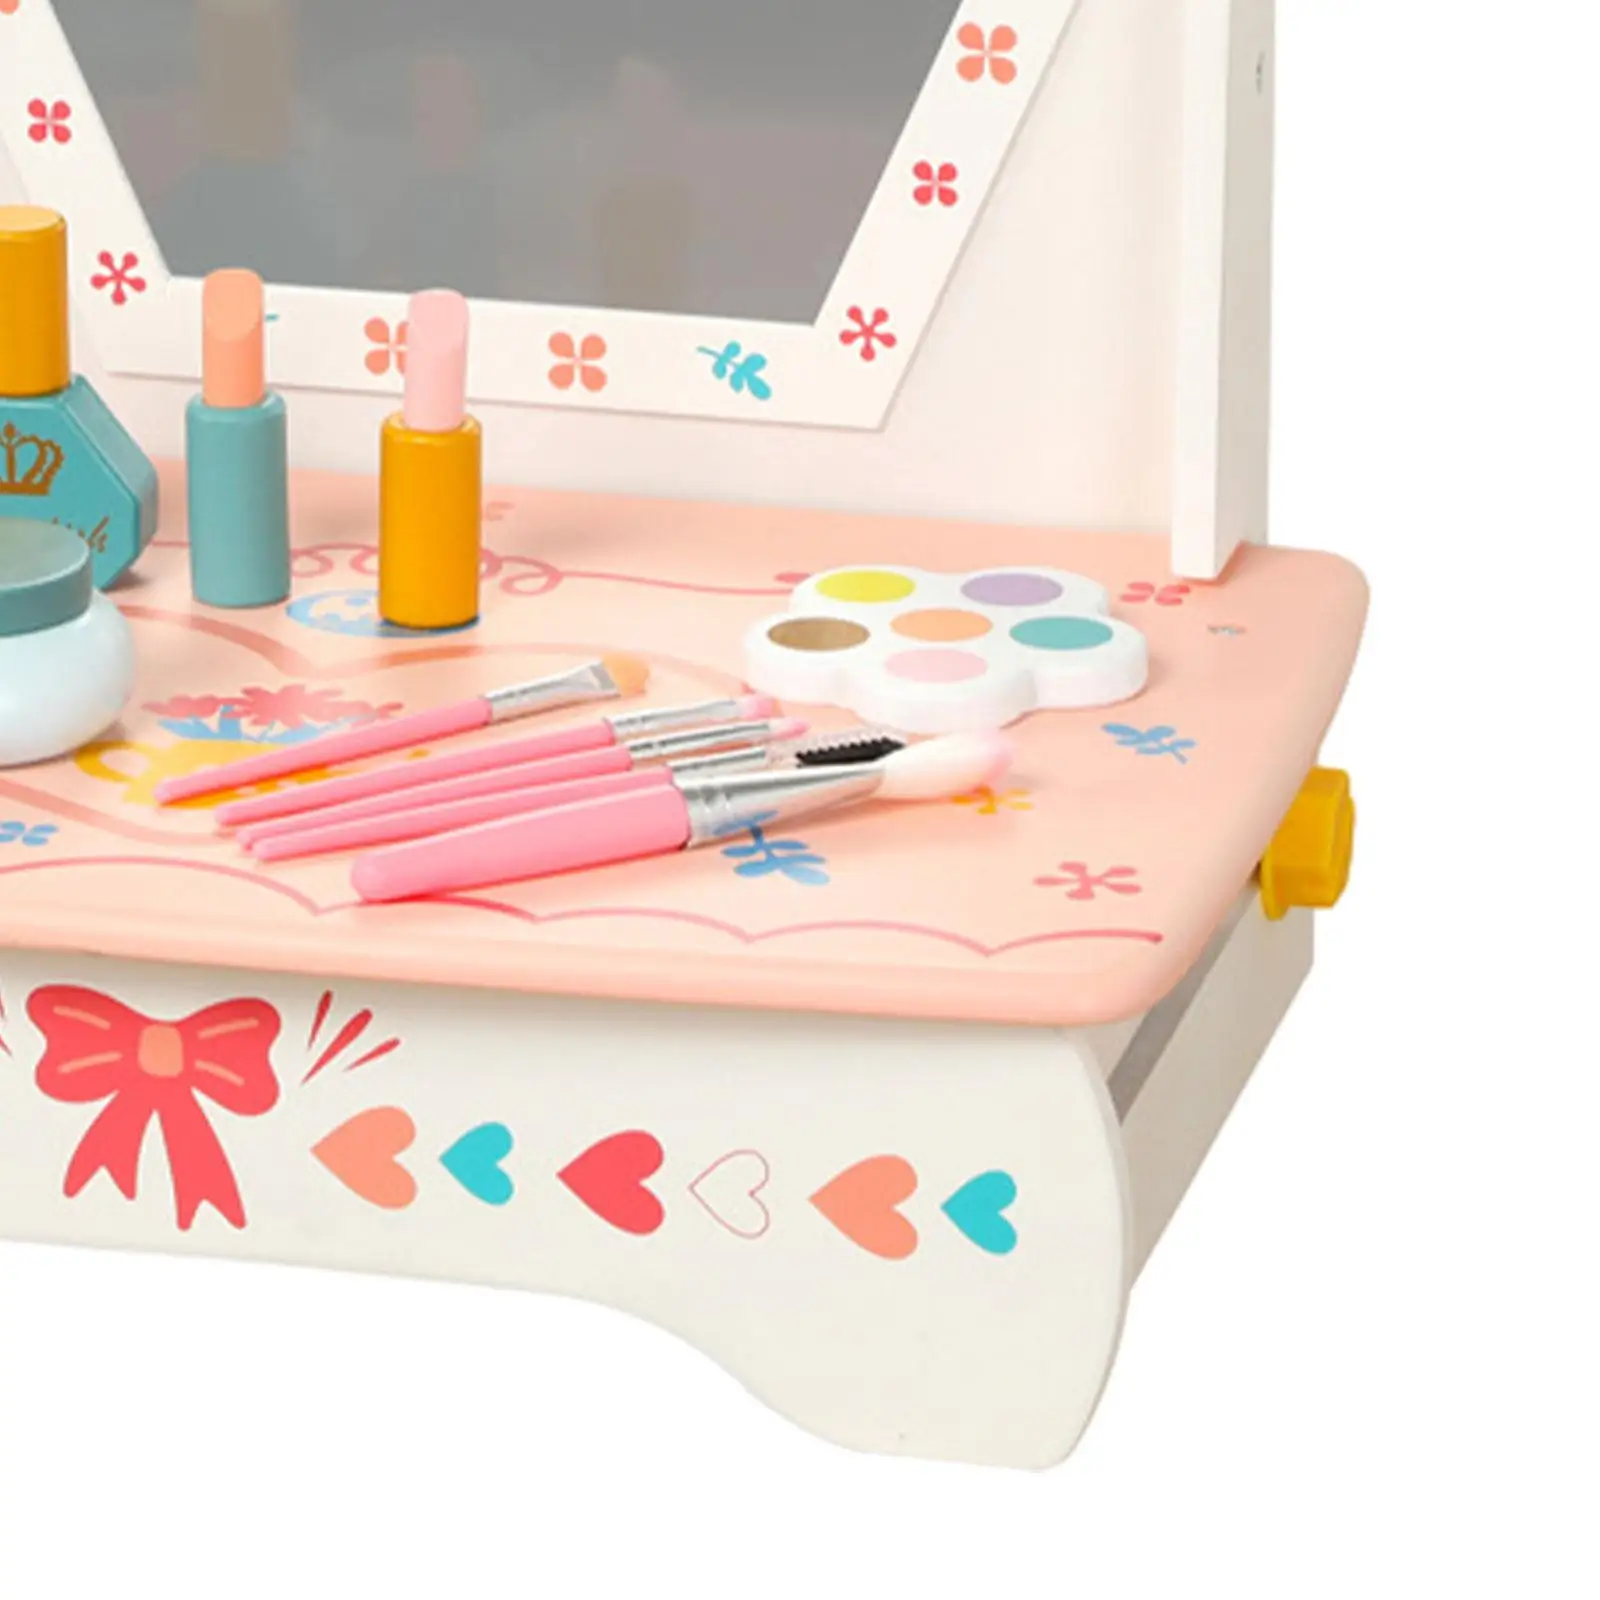 Wooden Vanity Table Toy Simulation Makeup Table Toy Set for Age 3 4 5 6